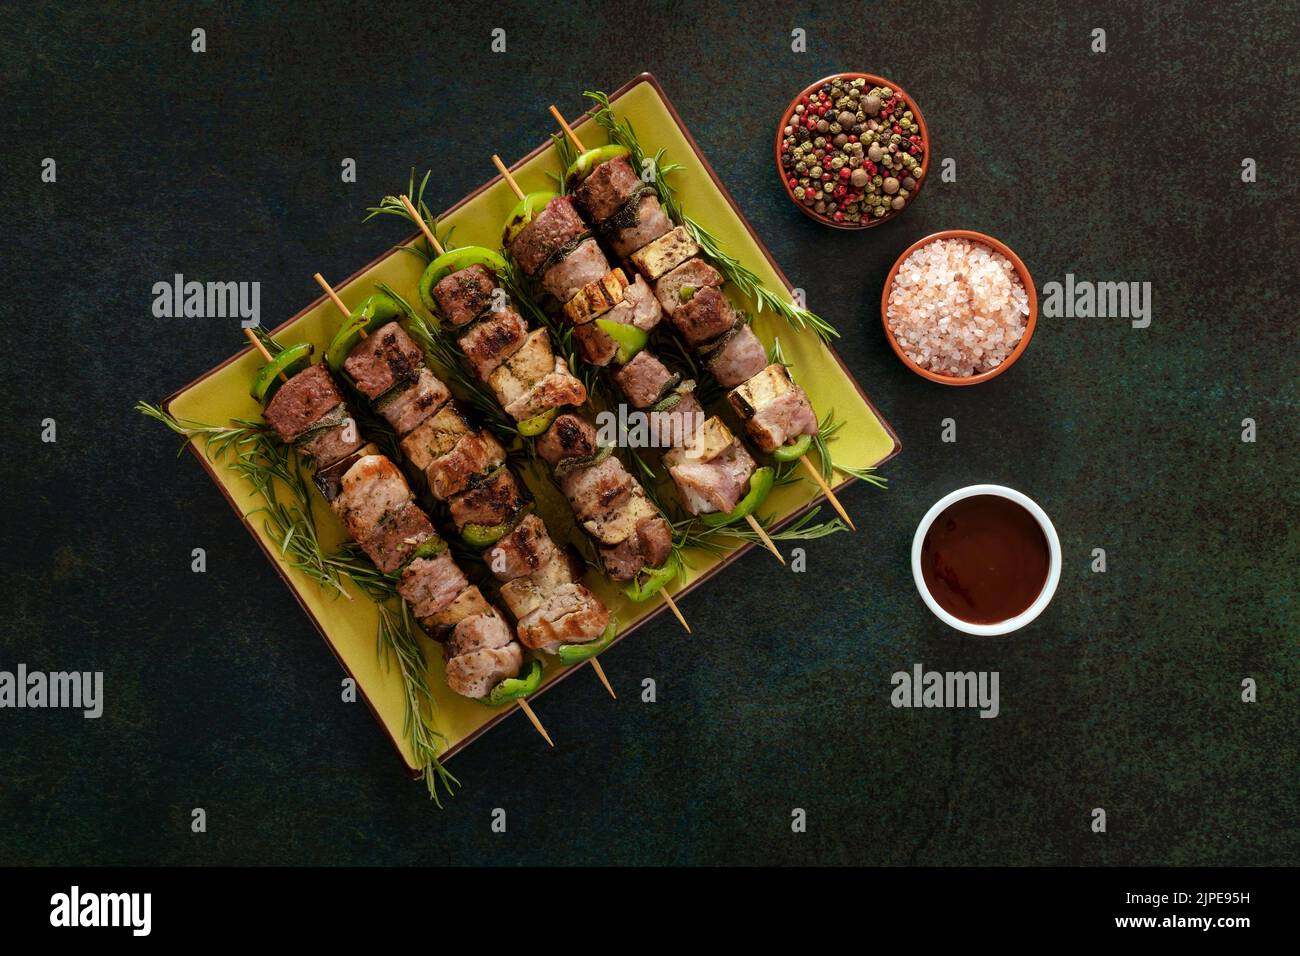 Baked meat skewers on a green dish with salt and mixed pepper. Stock Photo